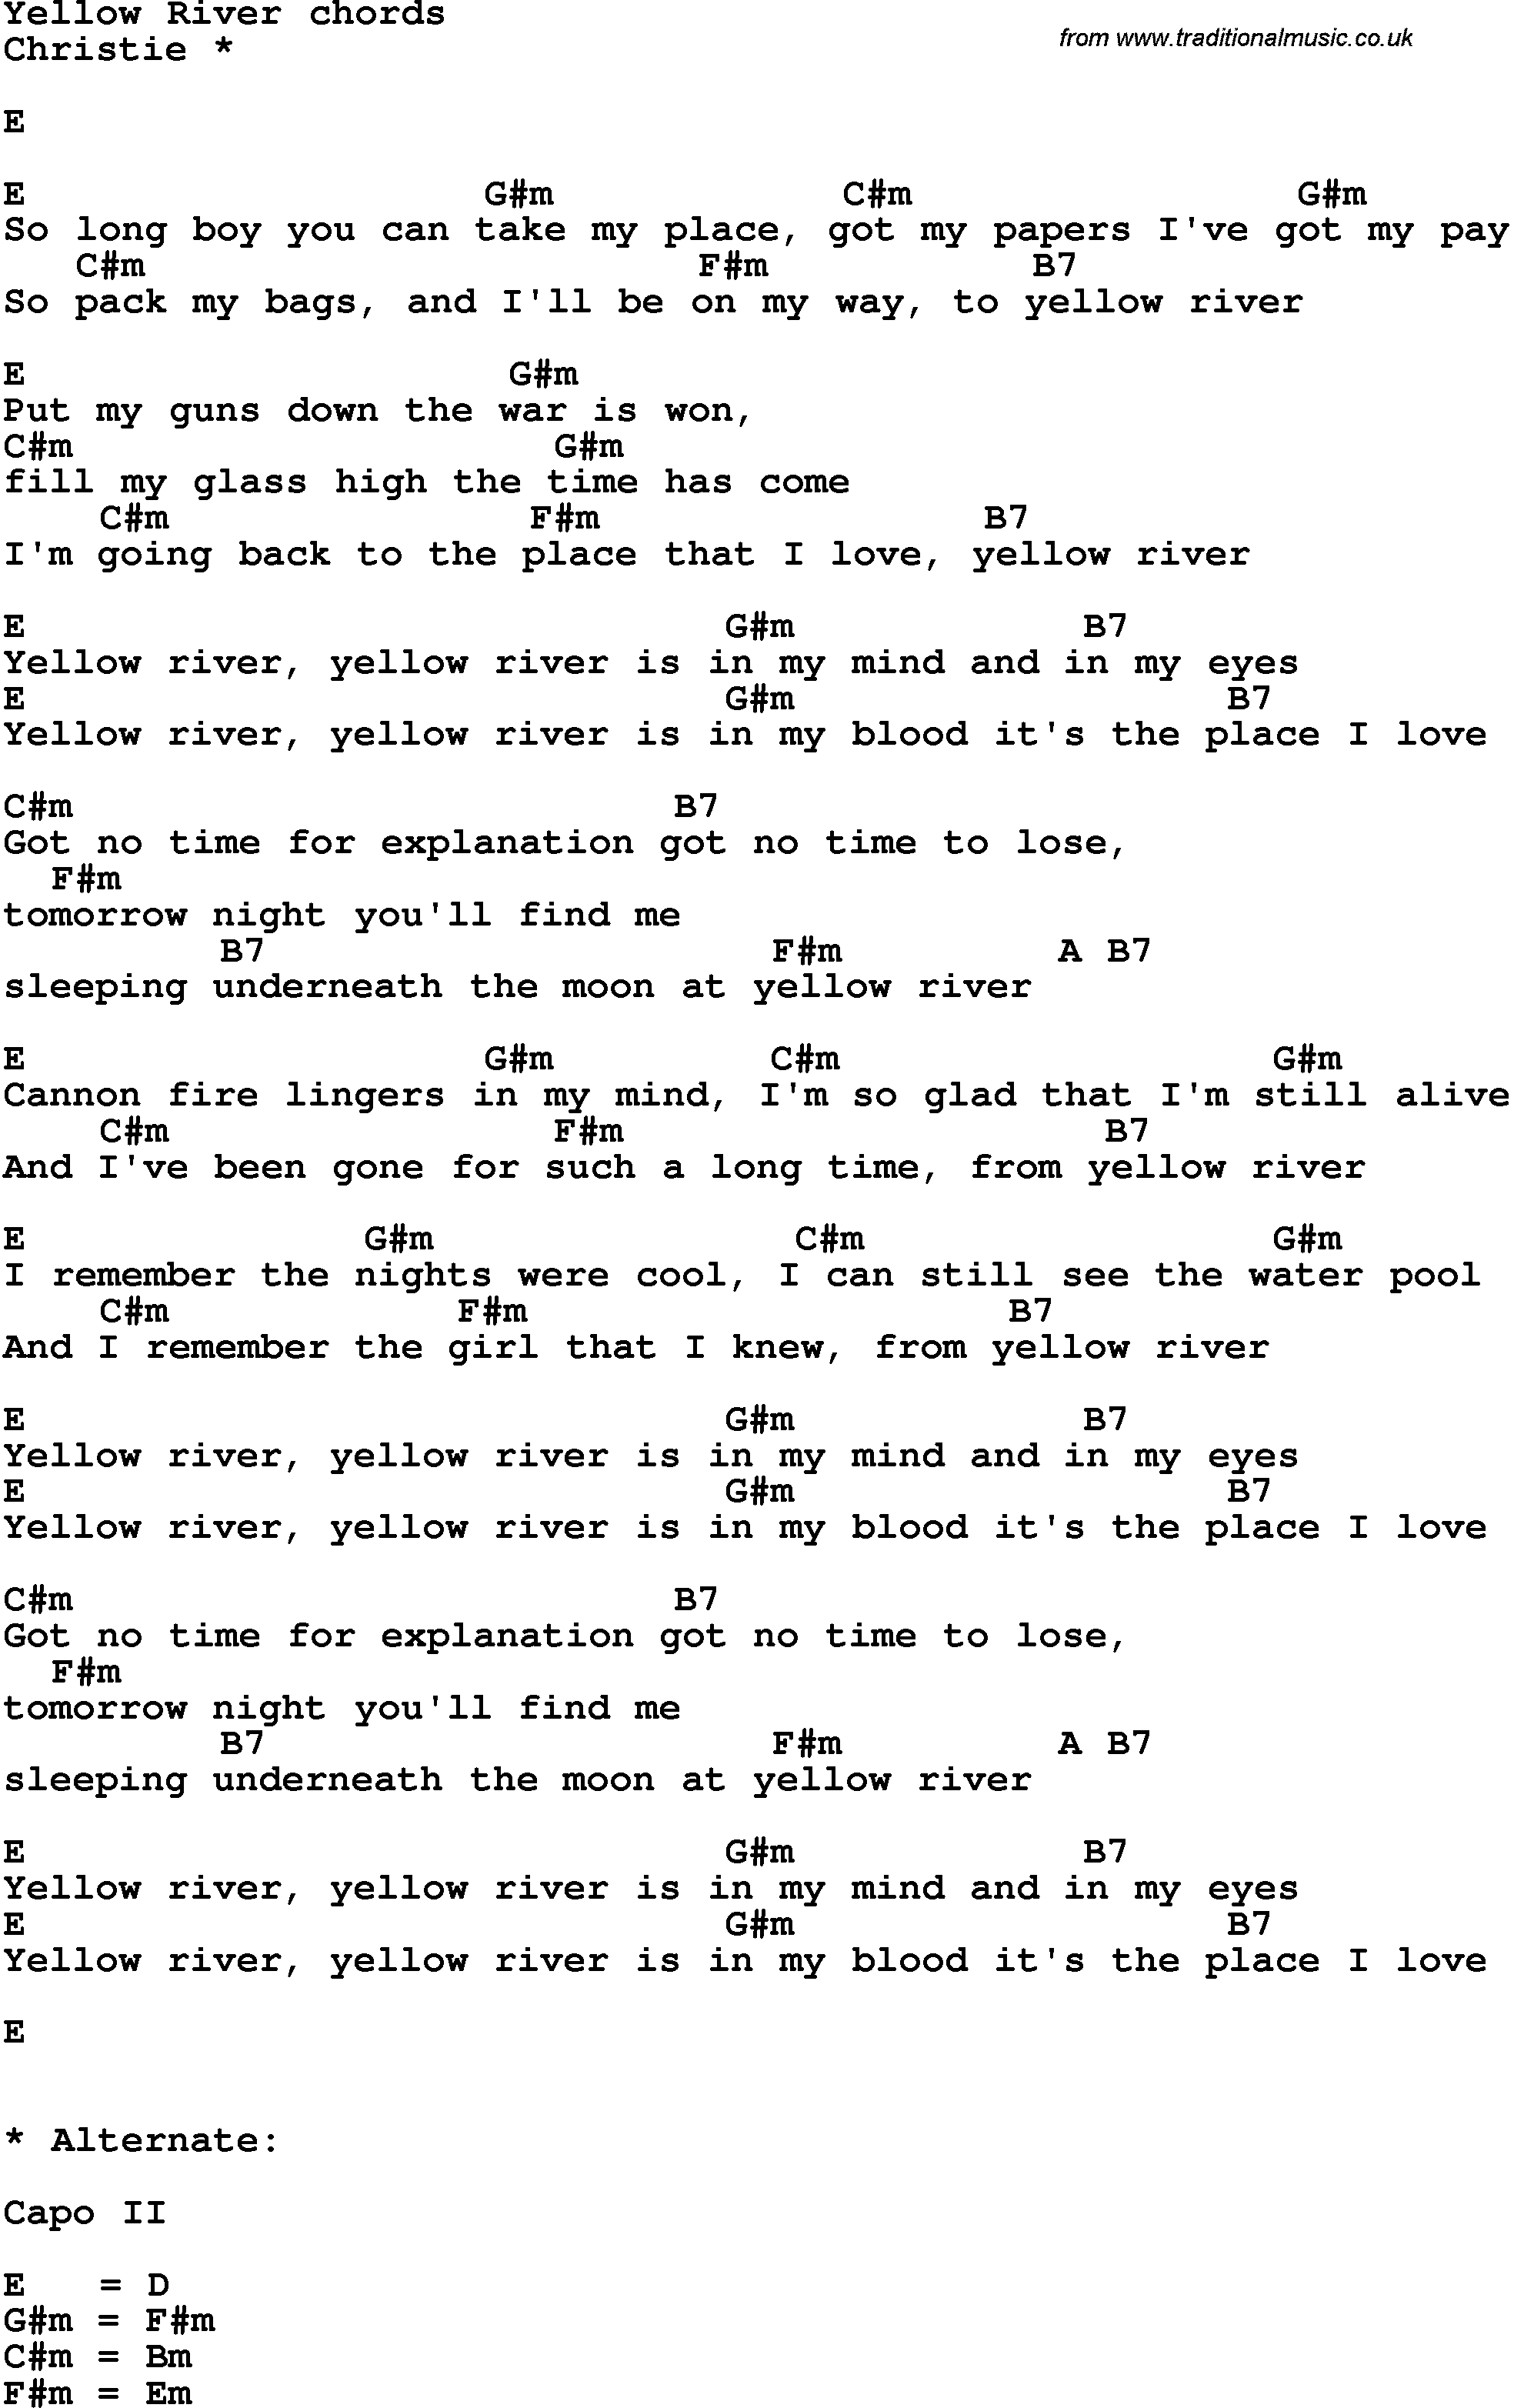 Song Lyrics with guitar chords for Yellow River